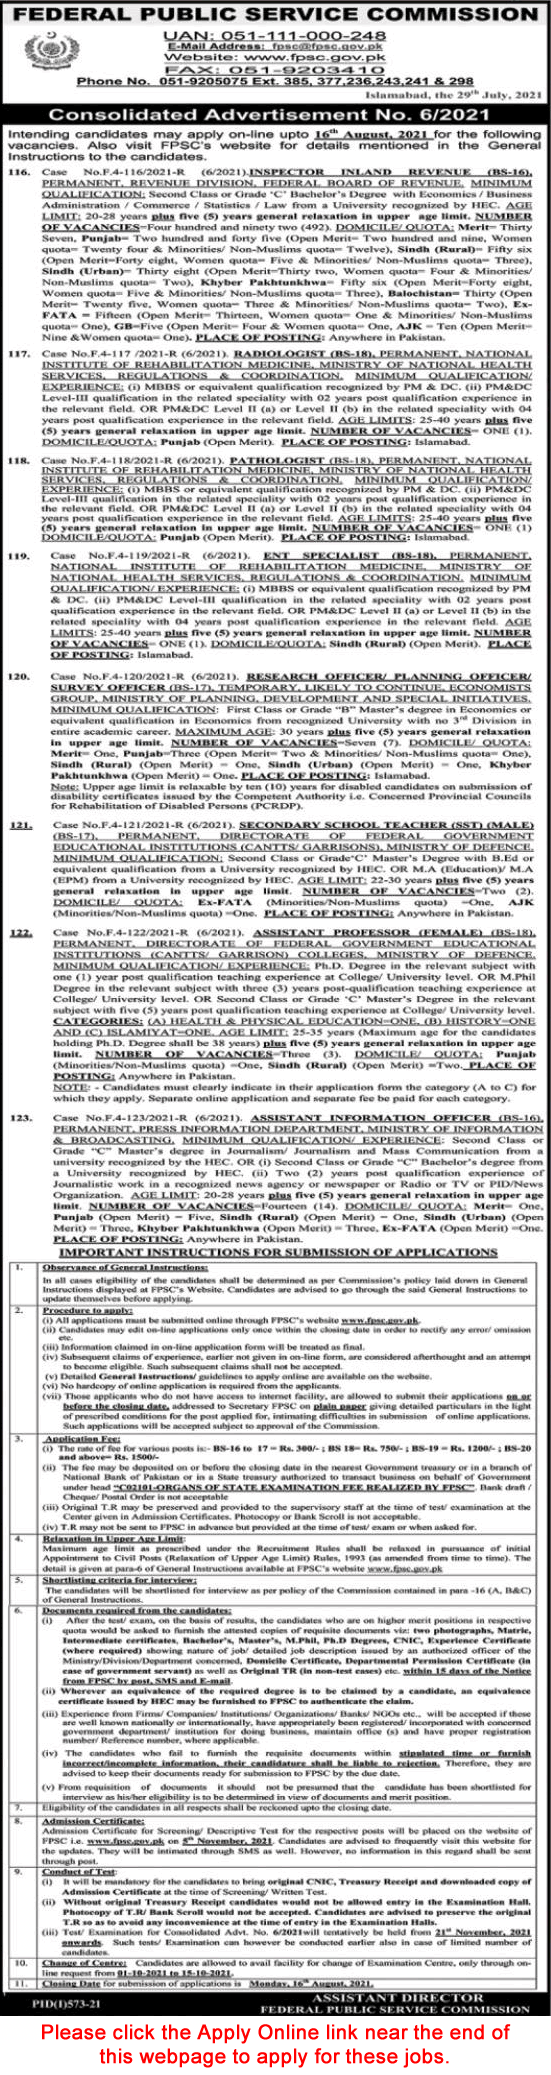 FPSC Jobs August 2021 Apply Online Consolidated Advertisement No 06/2021 6/2021 Latest